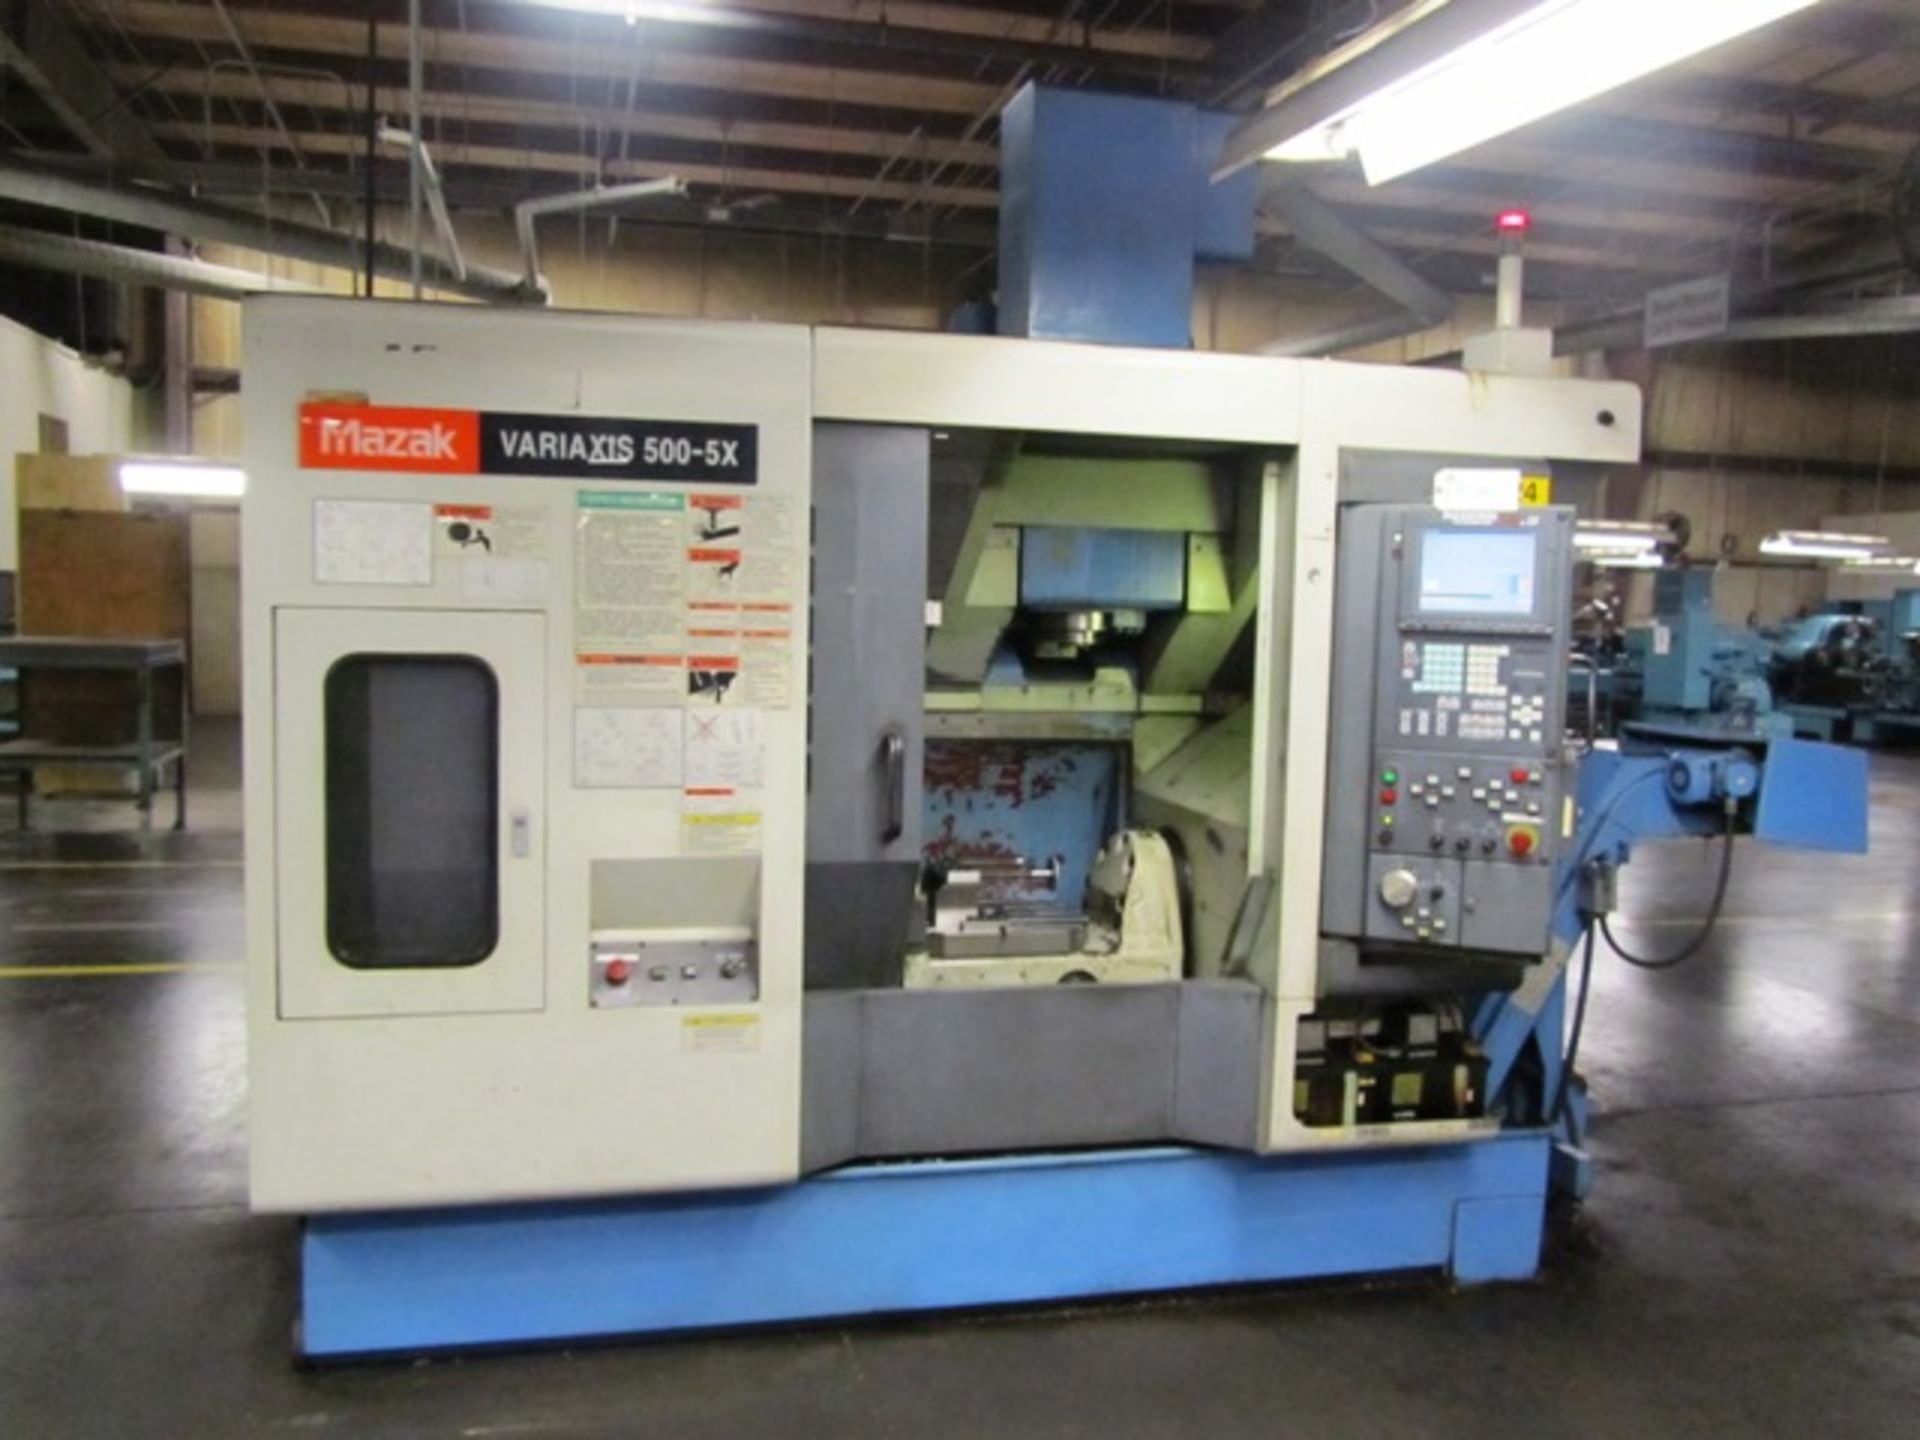 Mazak Variaxis 500-5x 5-Axis CNC Vertical Machining Center with 19'' Diameter Rotary Trunnion Table,